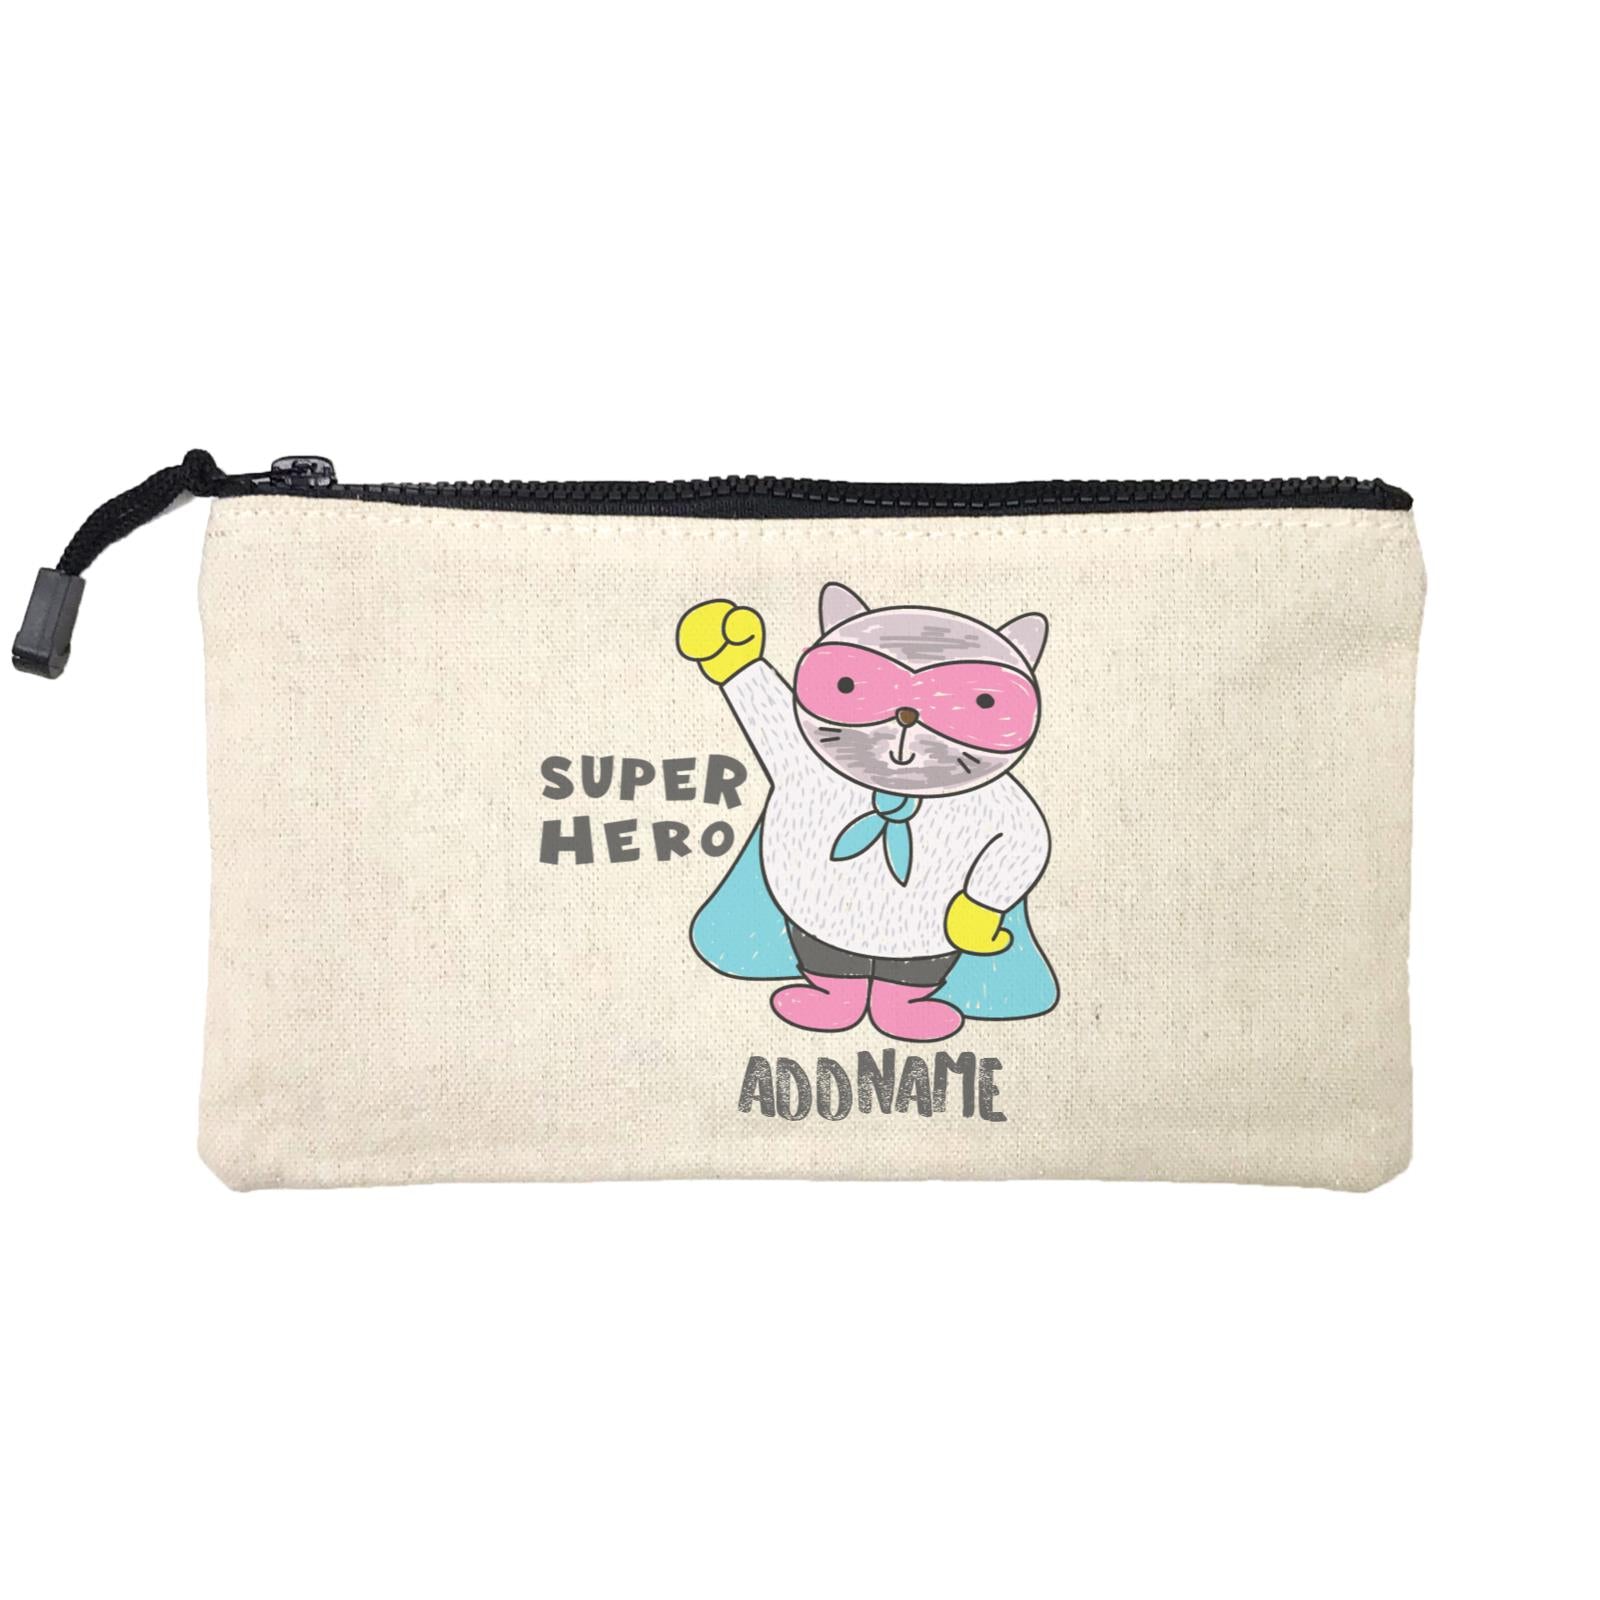 Cool Cute Animals Cats Super Hero Addname Mini Accessories Stationery Pouch